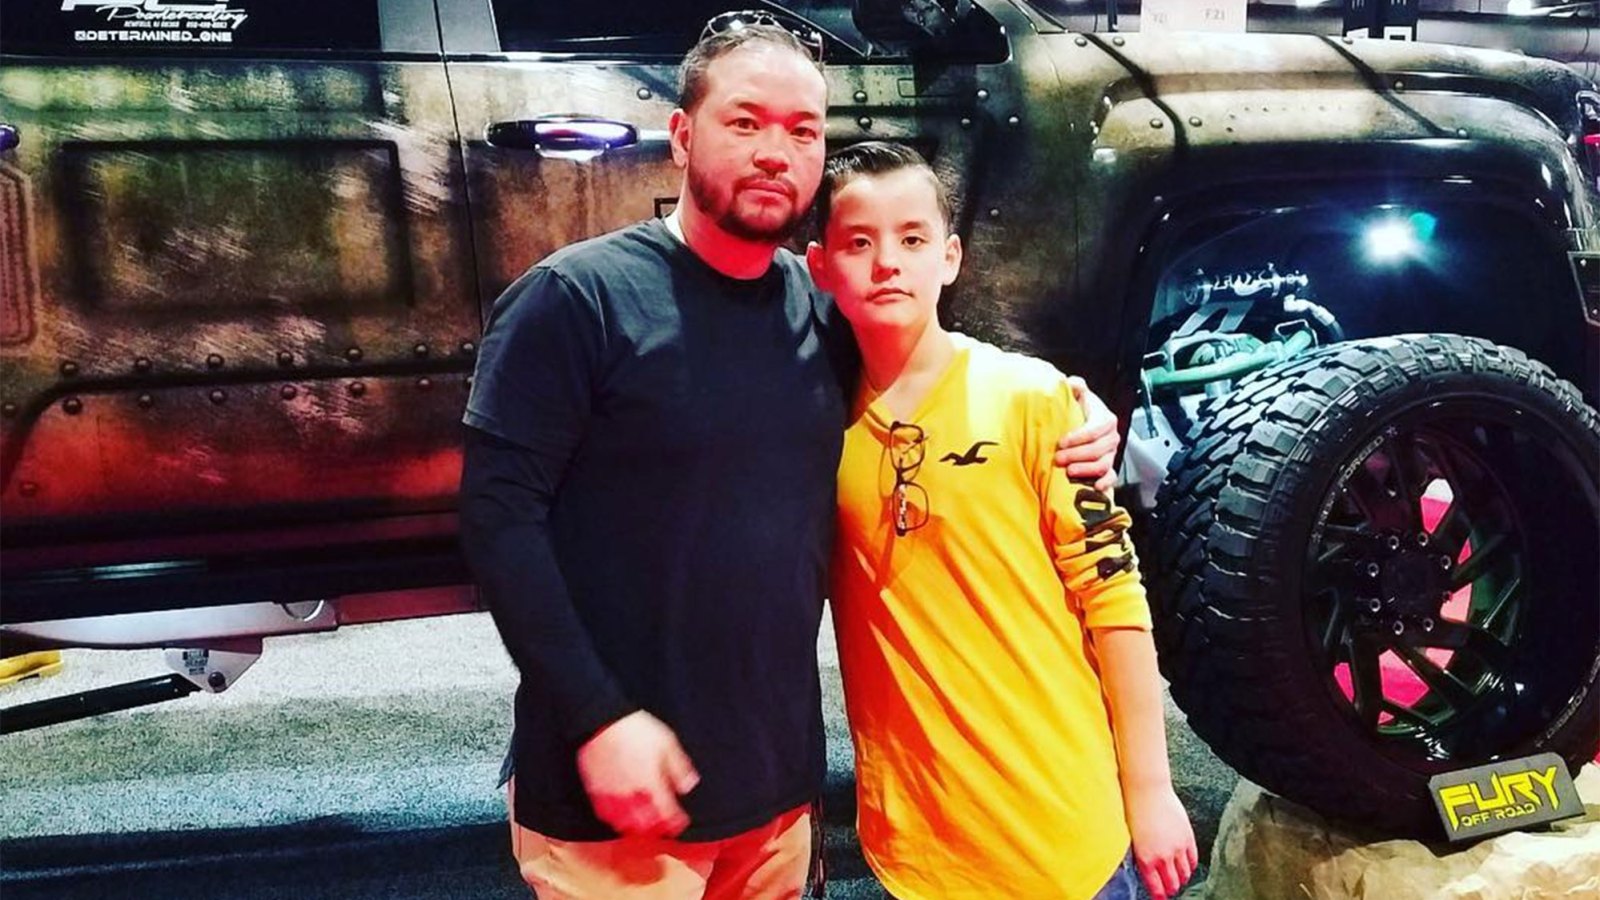 Jon Gosselin Spends a ‘Great Weekend’ With His Son Collin at an Auto Show